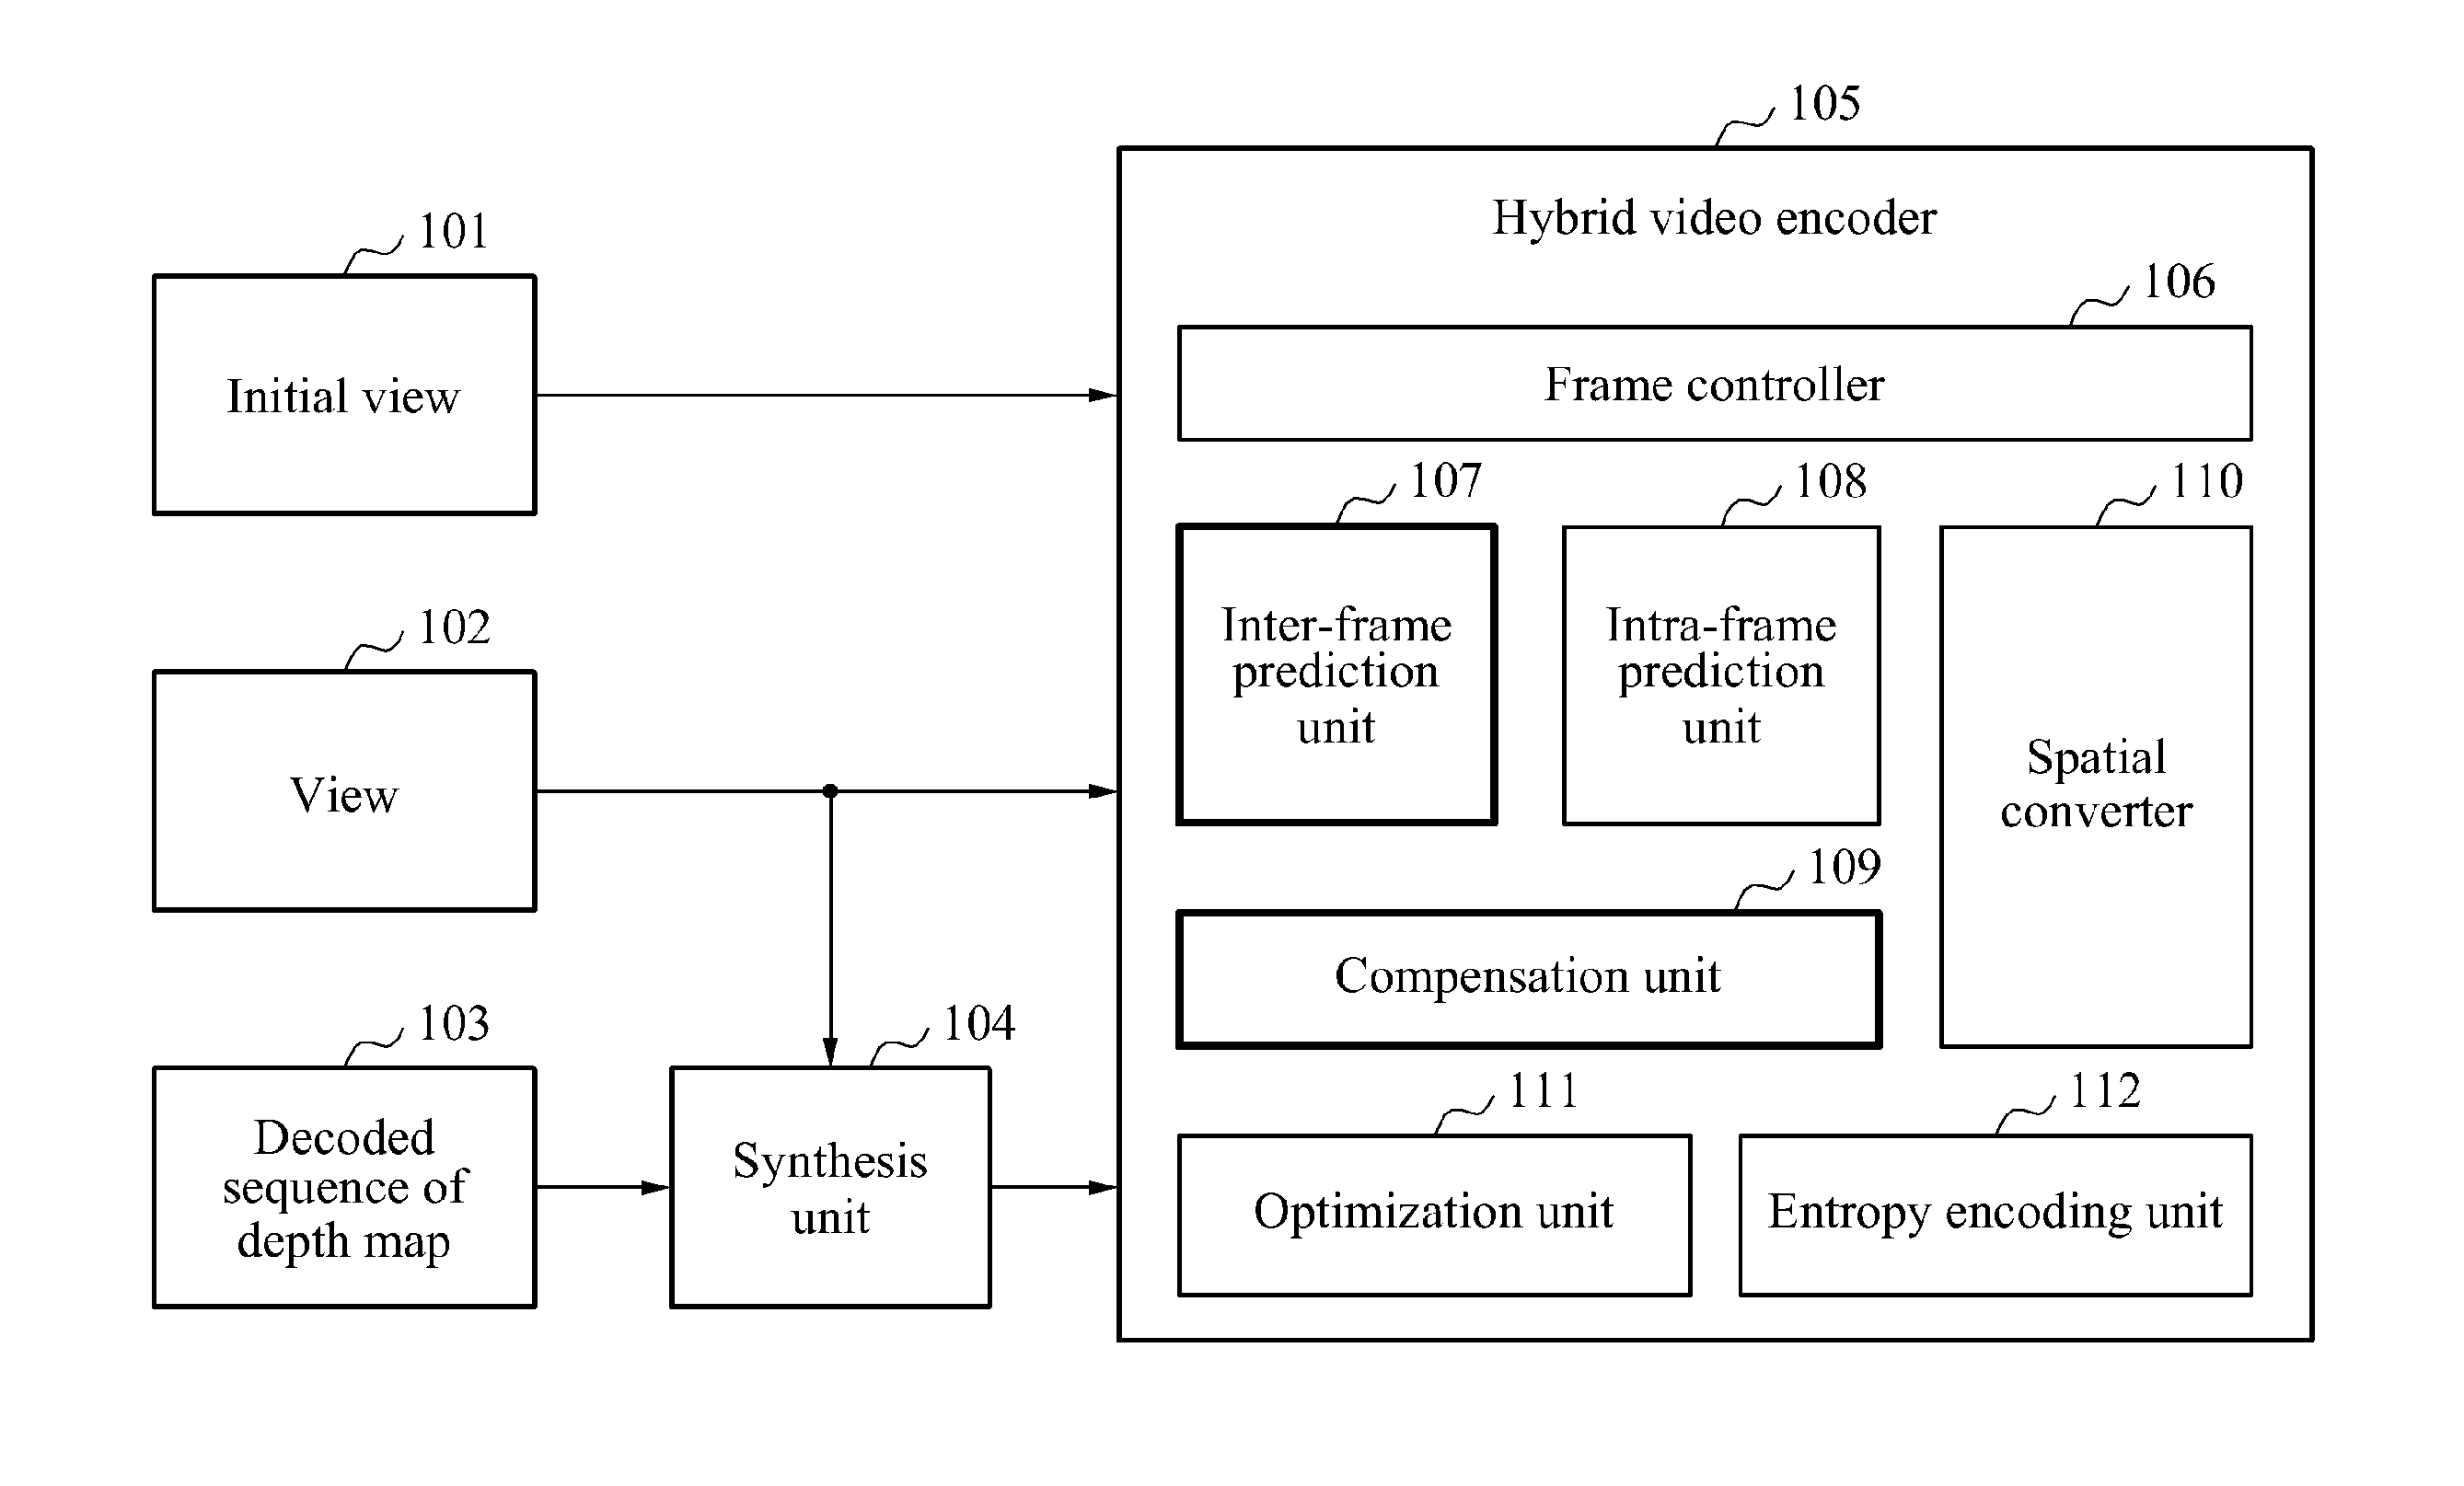 Method of encoding/decoding of multiview video sequence based on adaptive compensation of local illumination mismatches at interframe prediction